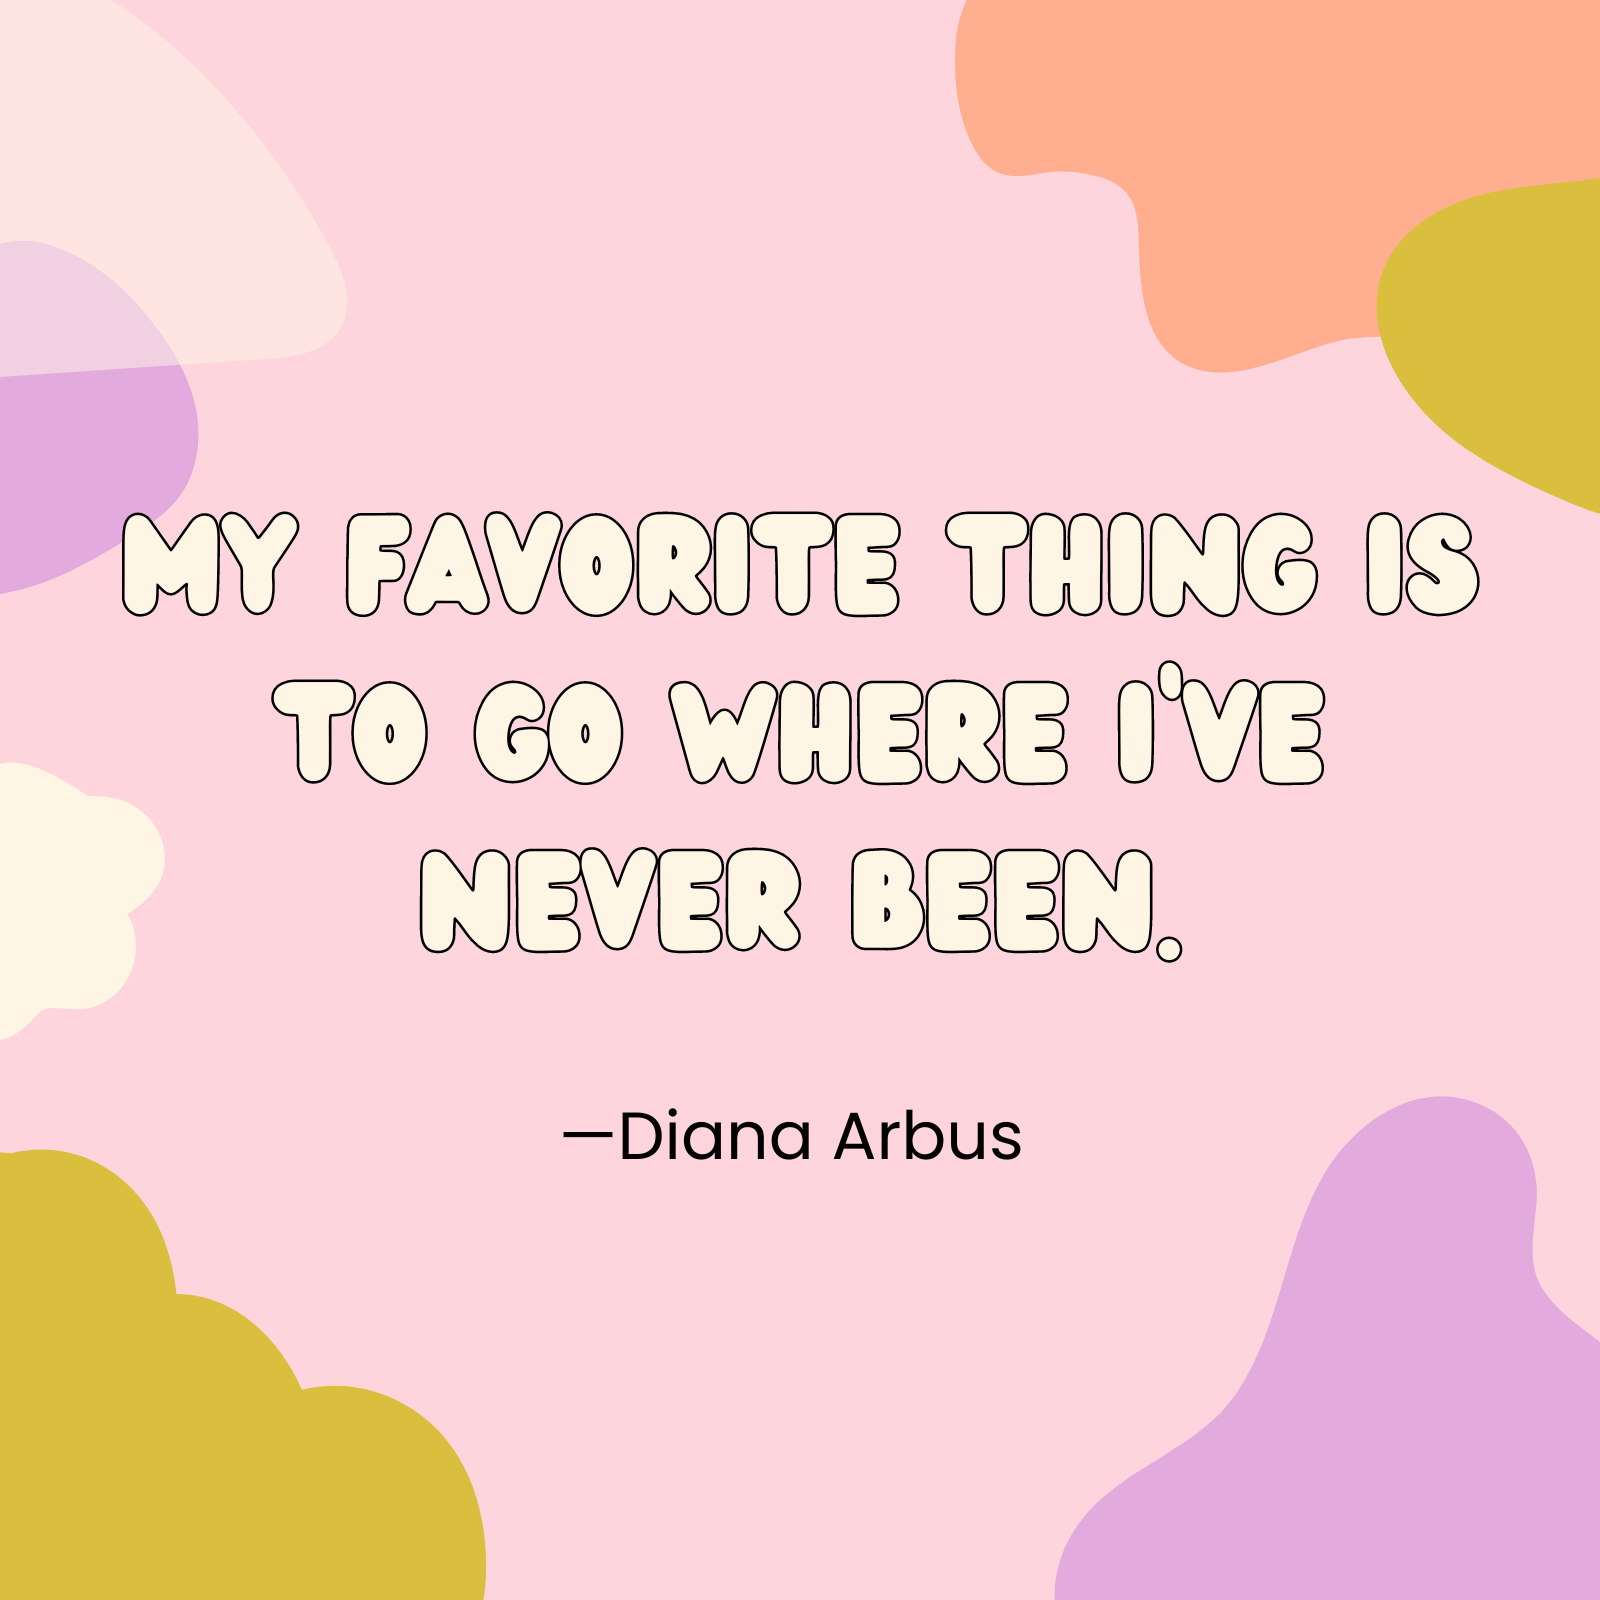 <p>"My favorite thing is to go where I've never been." —Diana Arbus </p>